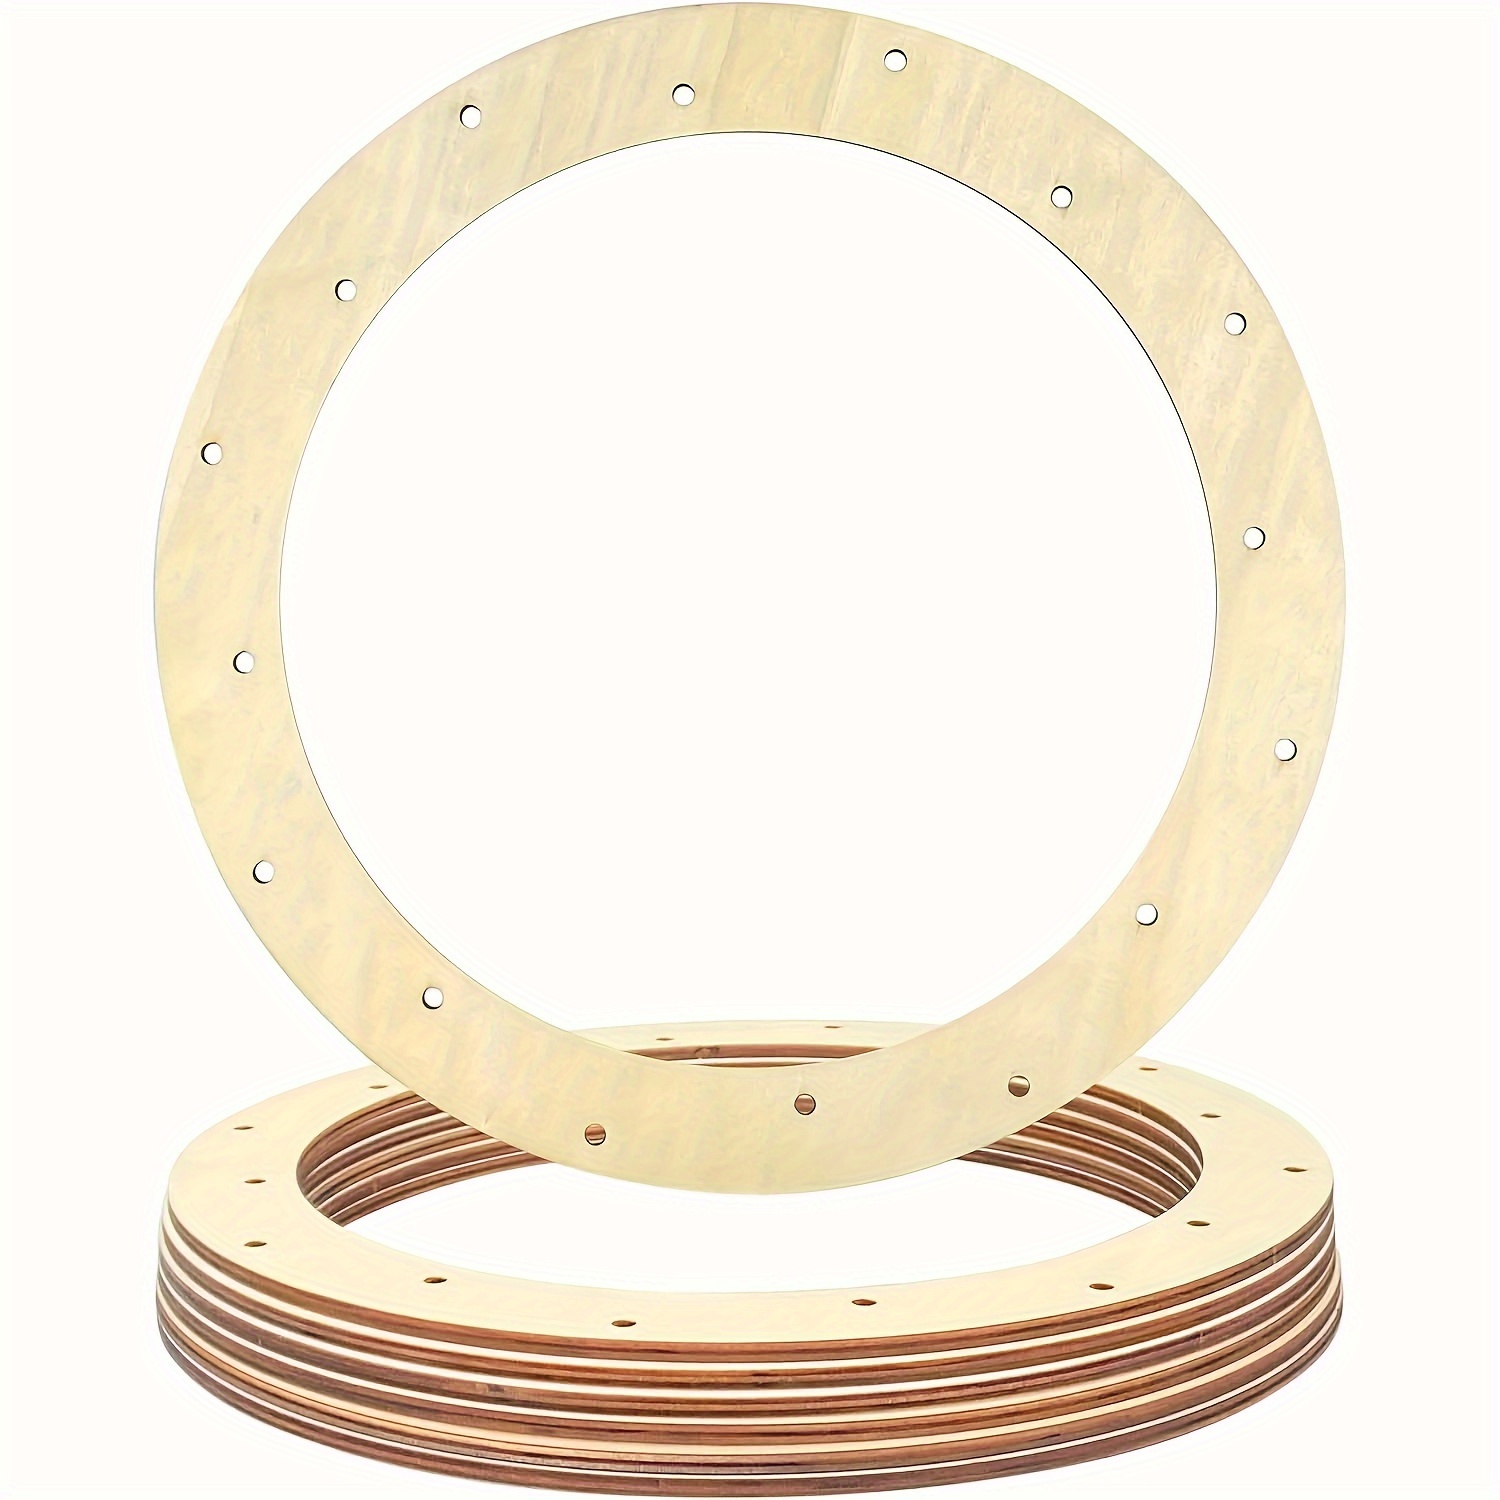 

6pcs 12" Unpainted Wooden Wreath Frames With 16 Holes - Diy Craft Rings For Floral Arrangements, Home Decor & Party Centerpieces Supplies For Small Ornaments For A Wreath’s